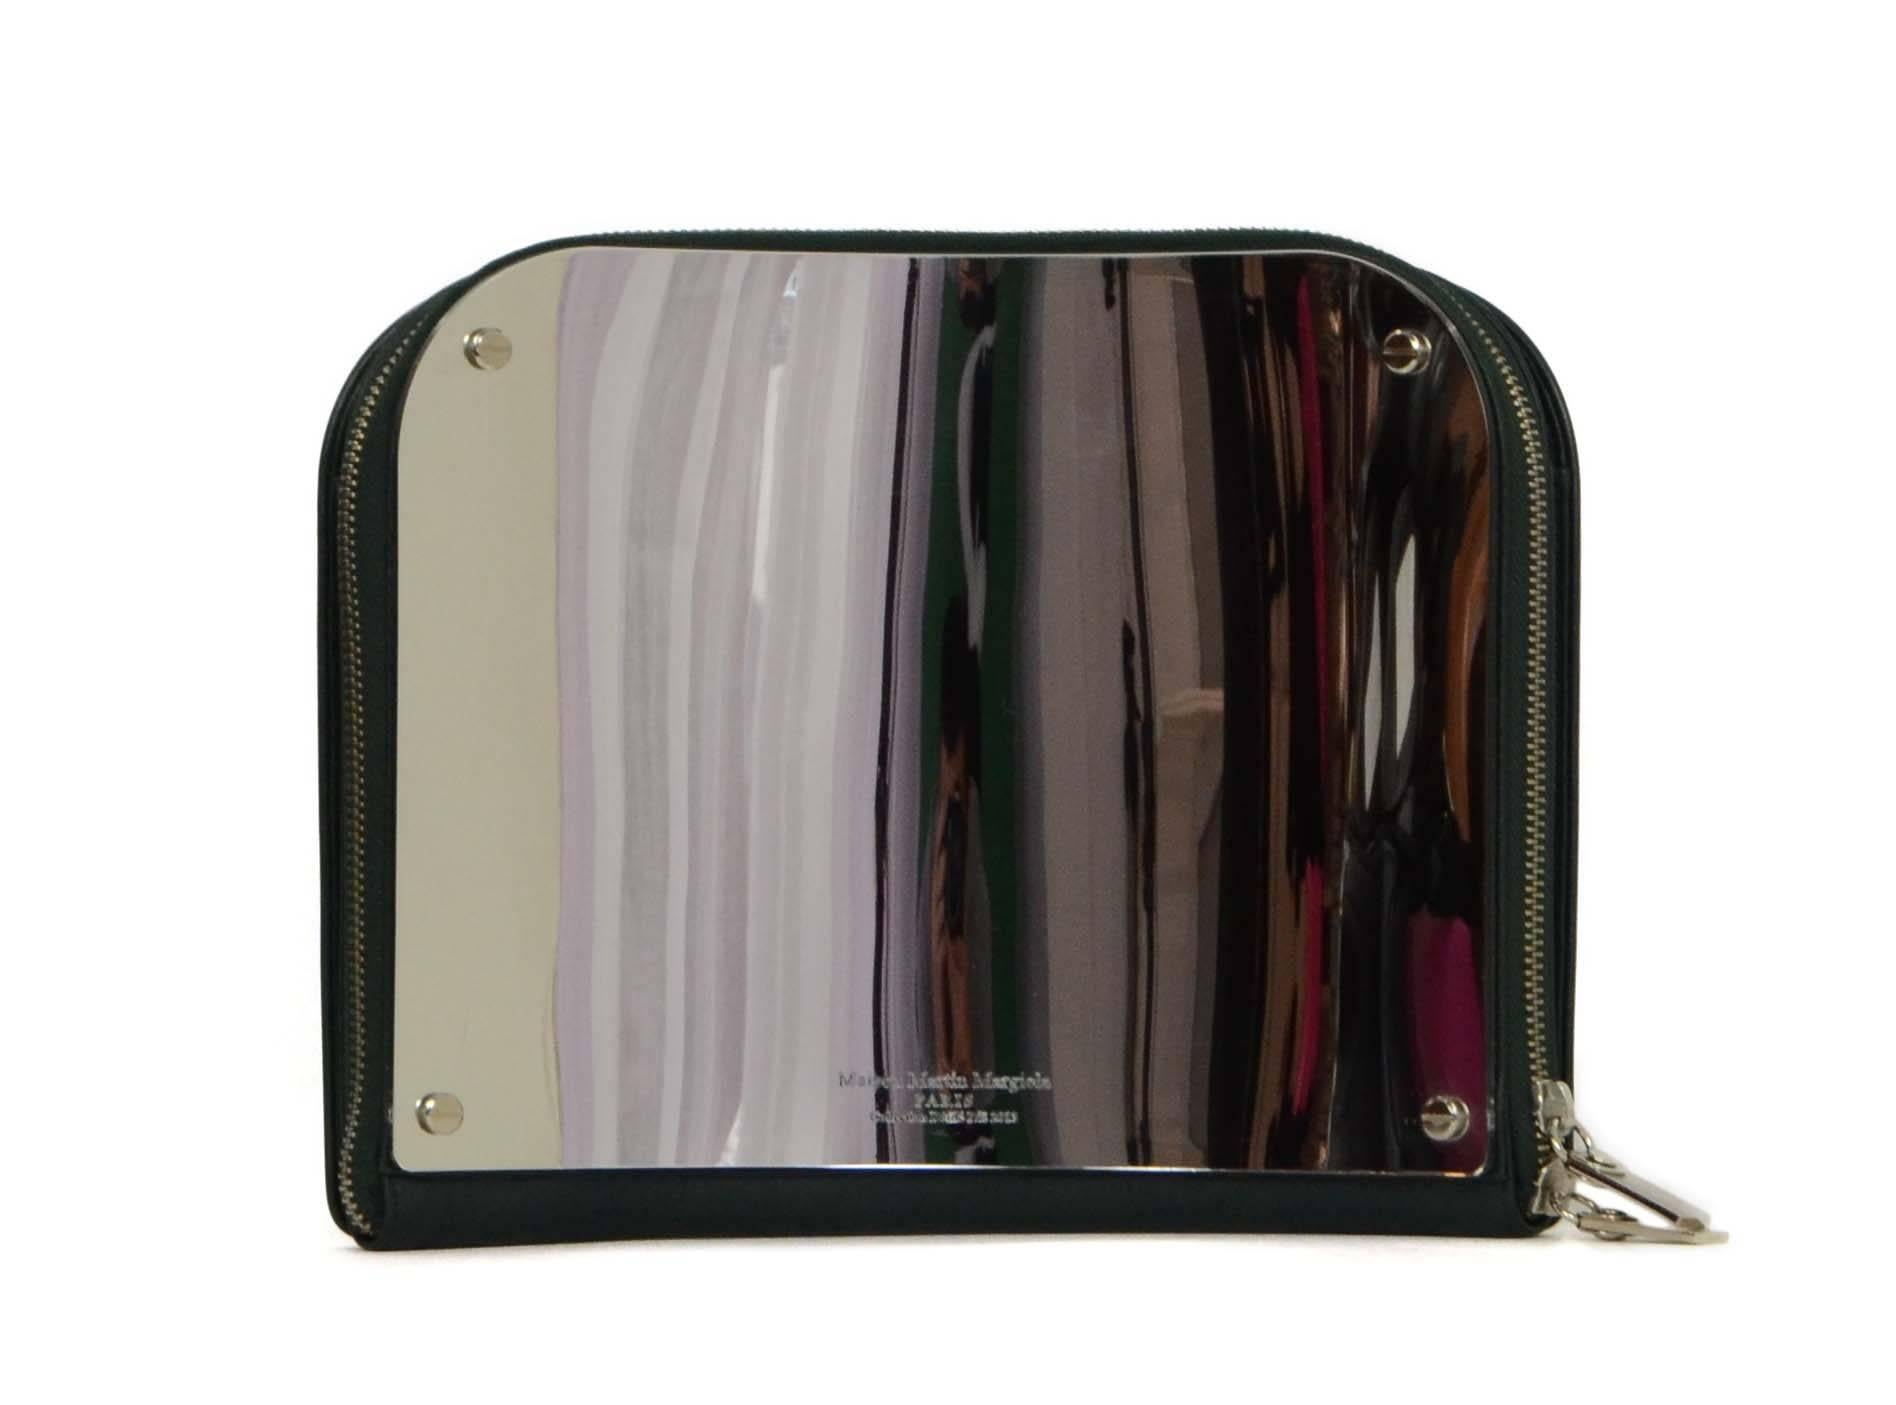 Maison Martin Margiela Fun House Mirror Clutch 
Features dark green leather around sides and on back panel
Made In: Italy
Year of Production: 2013
Color: Green and silver
Hardware: Silvertone
Materials: Leather and glass
Lining: Black